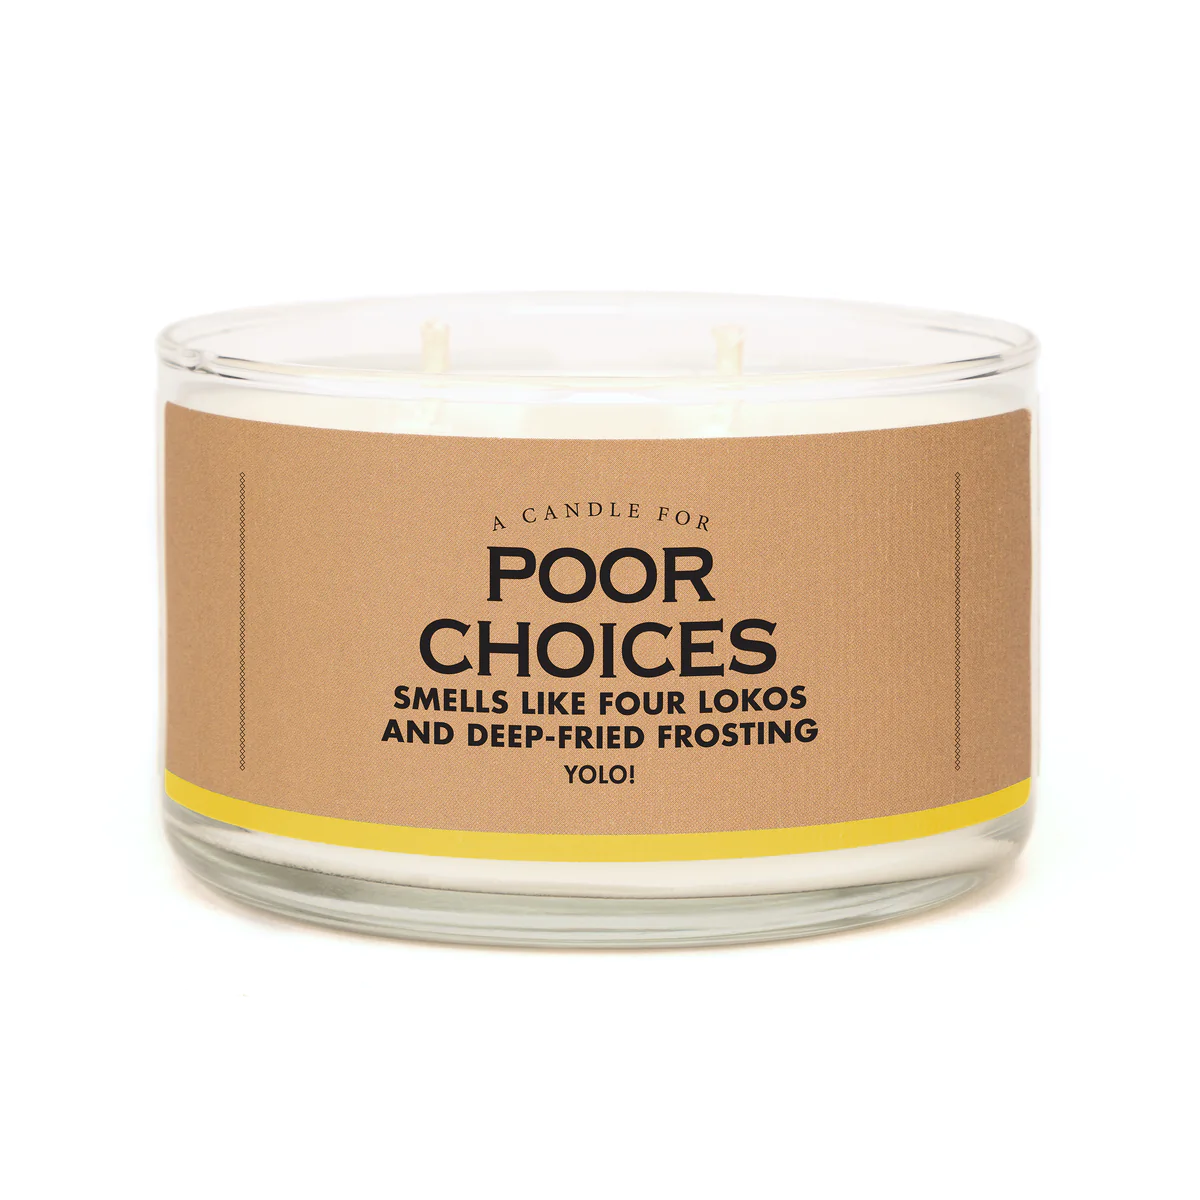 A Candle for Poor Choices - Heart of the Home PA